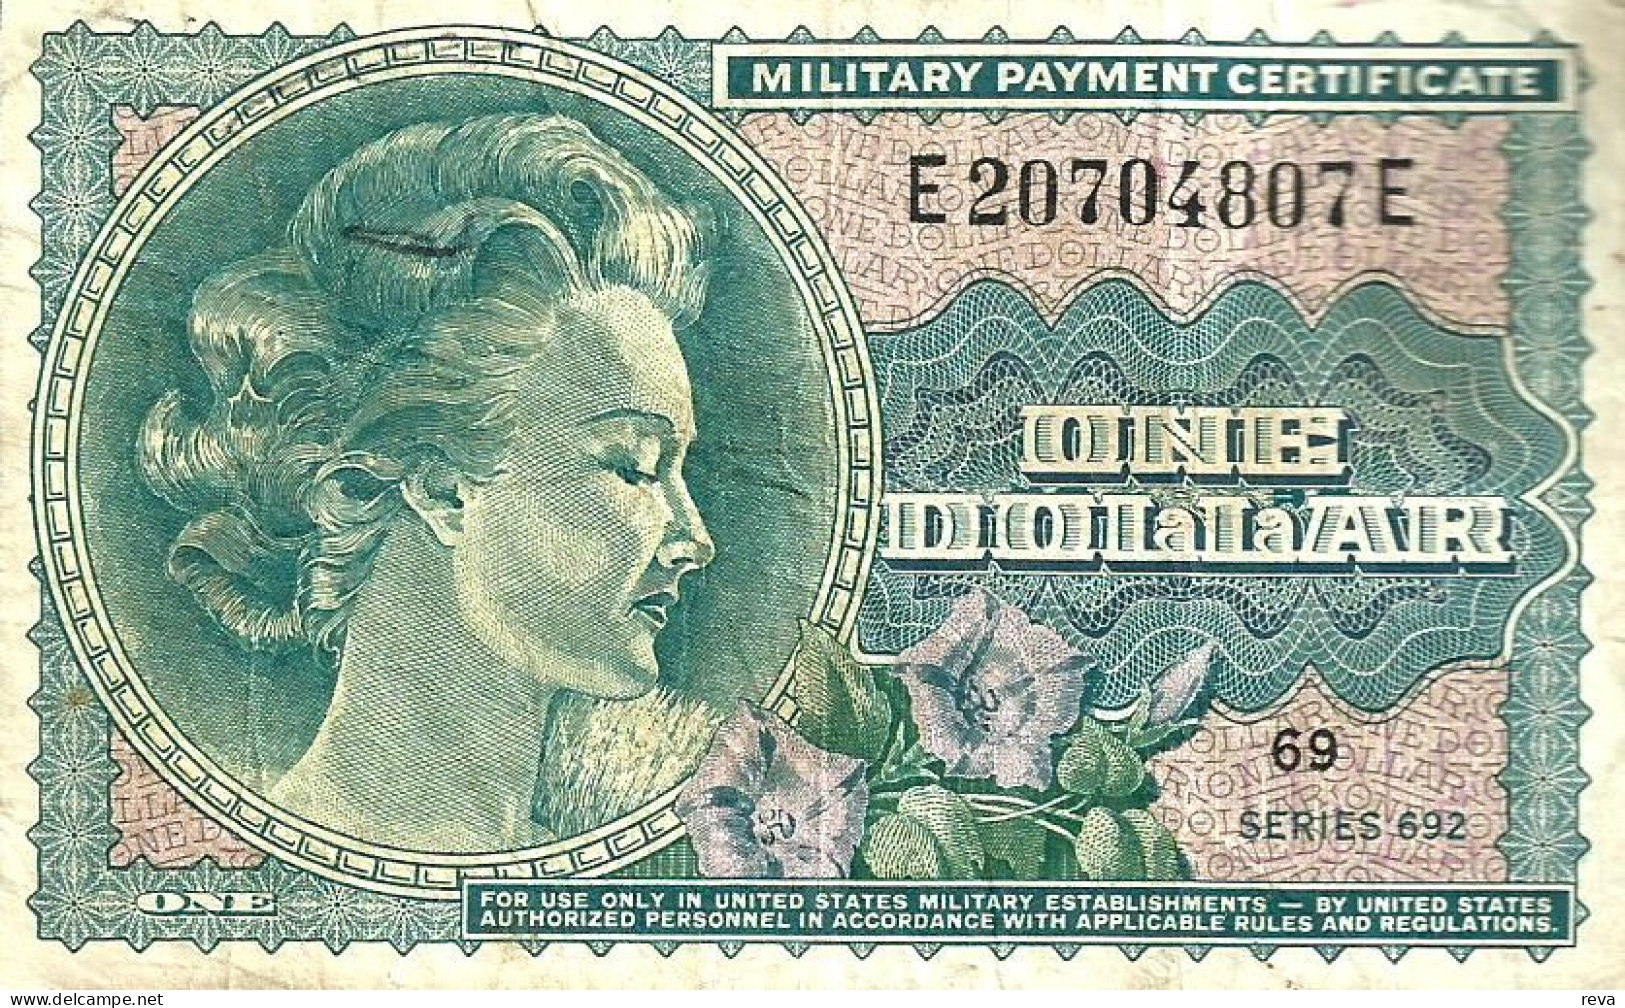 USA UNITED STATES $1 MILITARY CERTIFICATE GREEN WOMAN SERIES 692 VF ND(1970) PM93a READ DESCRIPTION CAREFULLY !! - 1970 - Reeksen 692